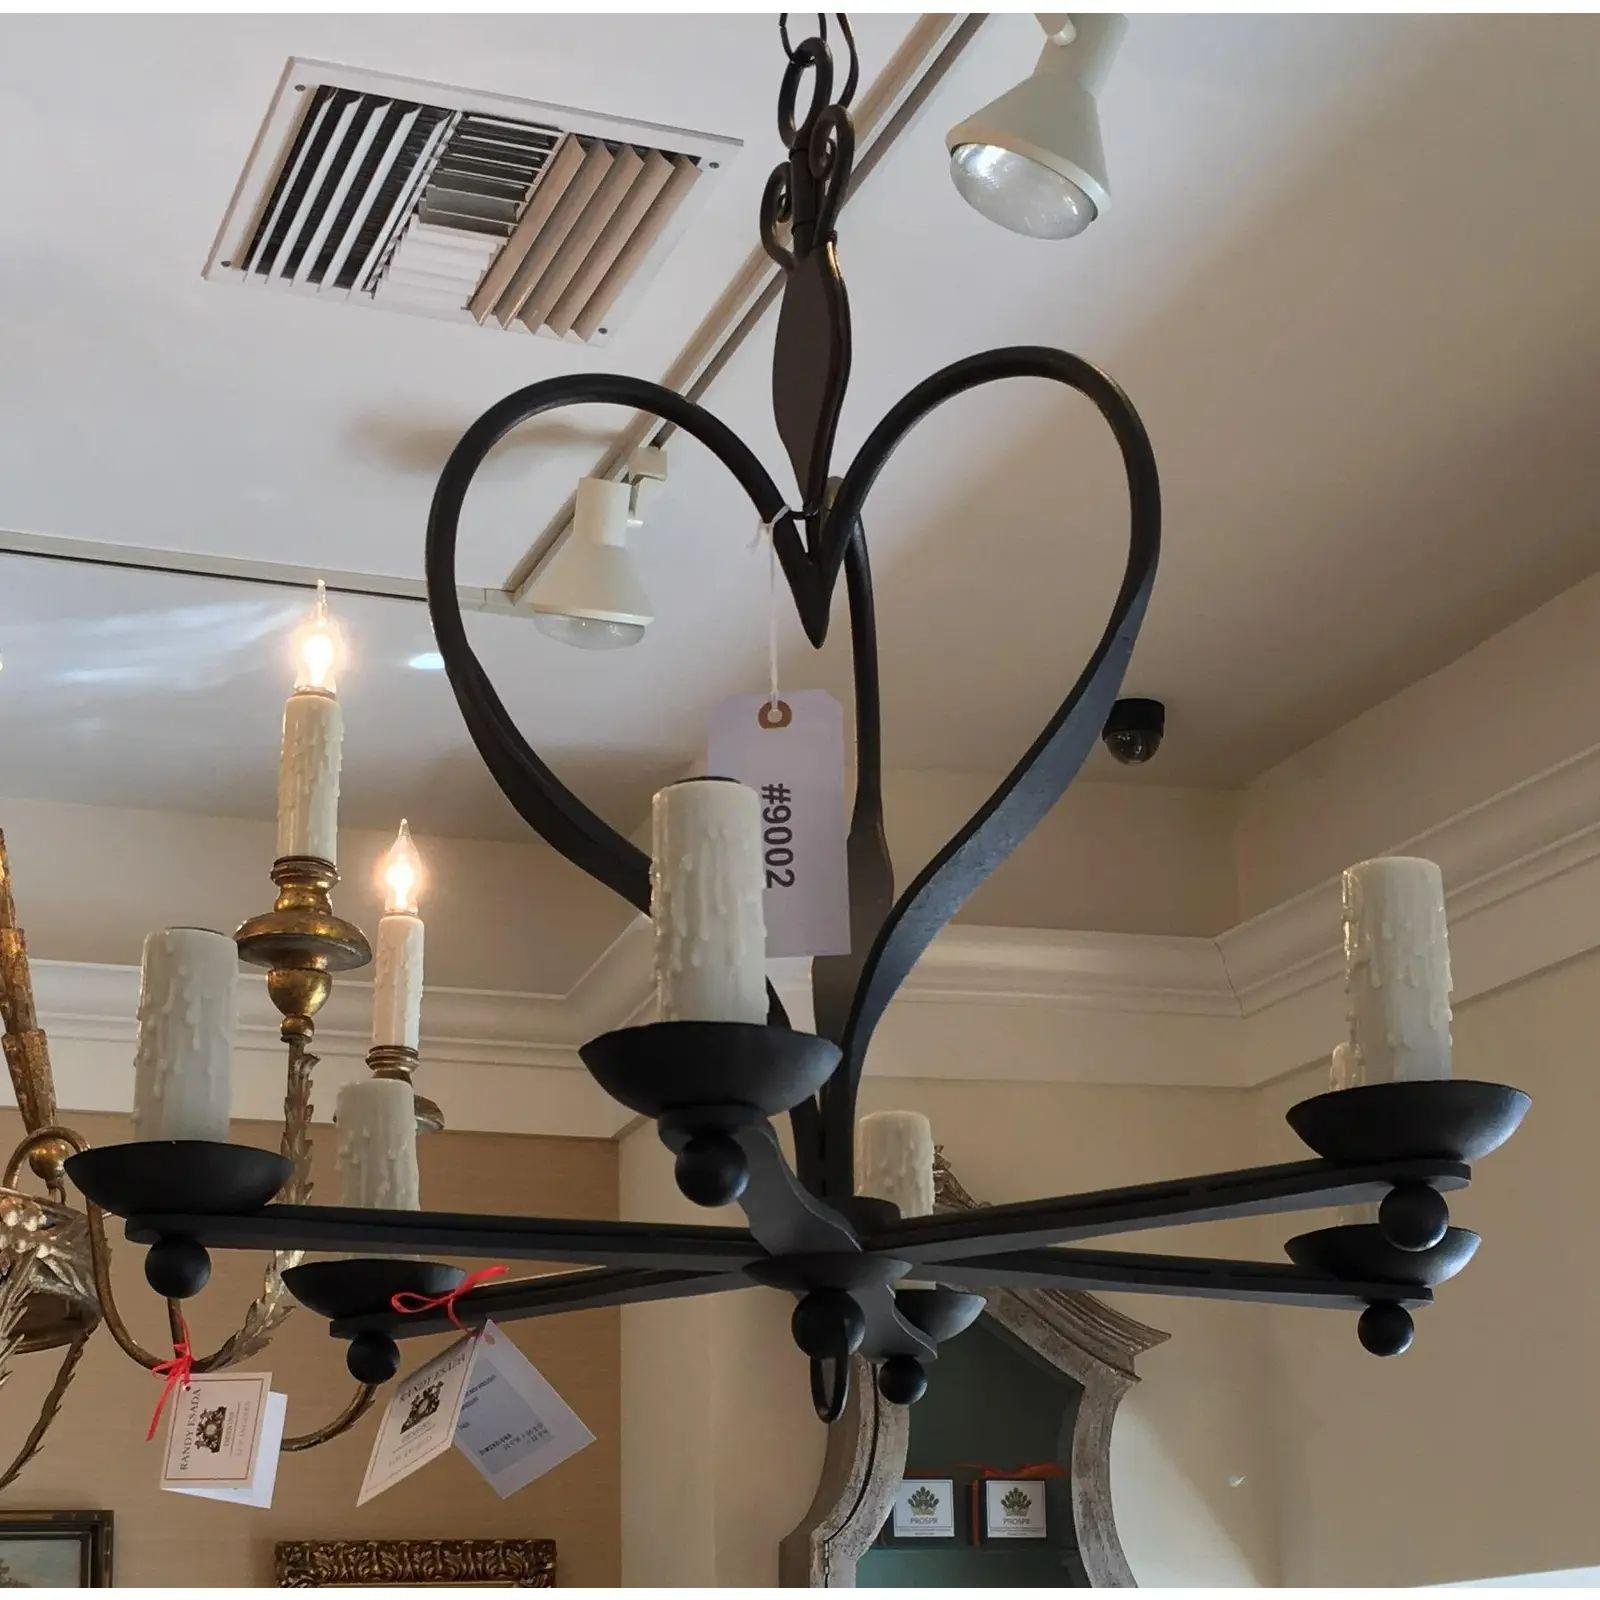 This lovely chandelier is a genuine designer fixture and features 6 lights and an unusual heart form.

Sevilla Chandelier (6-Arm).
Matching canopy included as shown in image.
Finish: Aged iron.
Height w/canopy - w/o chain

Additional information: